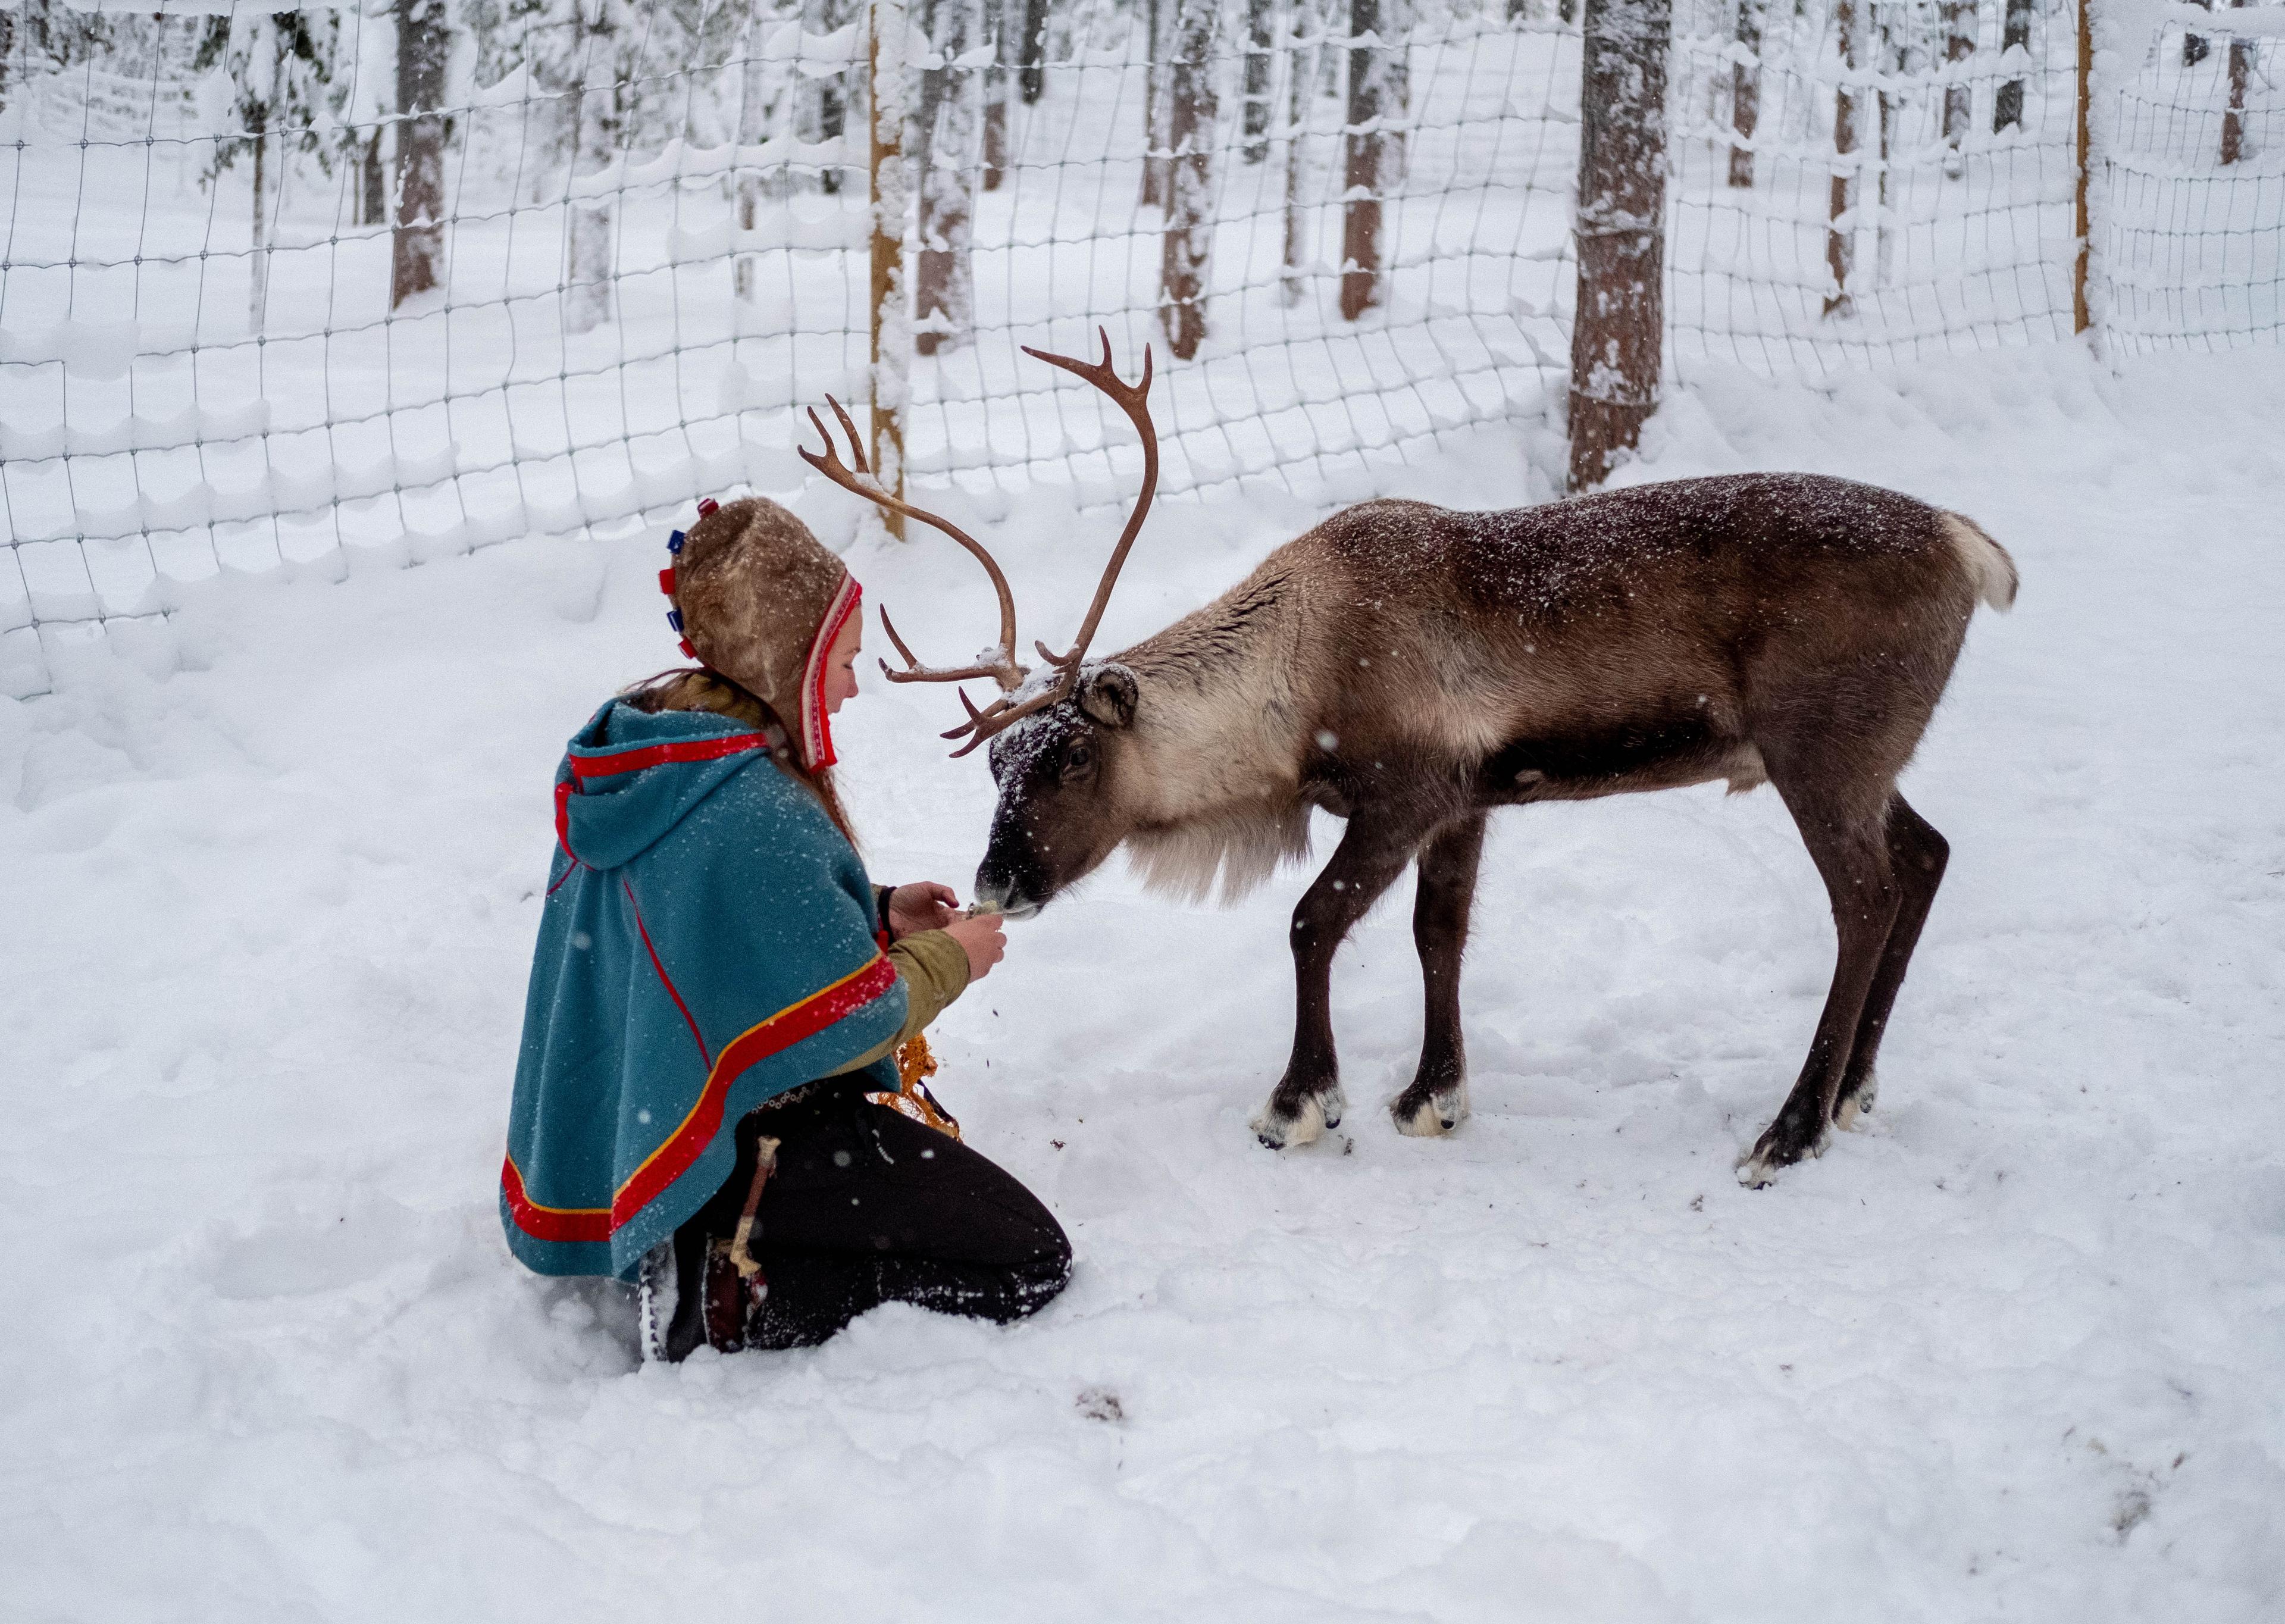 A person in traditional Sami attire kneels in the snow, offering a treat to a reindeer amidst a snowy forest setting.